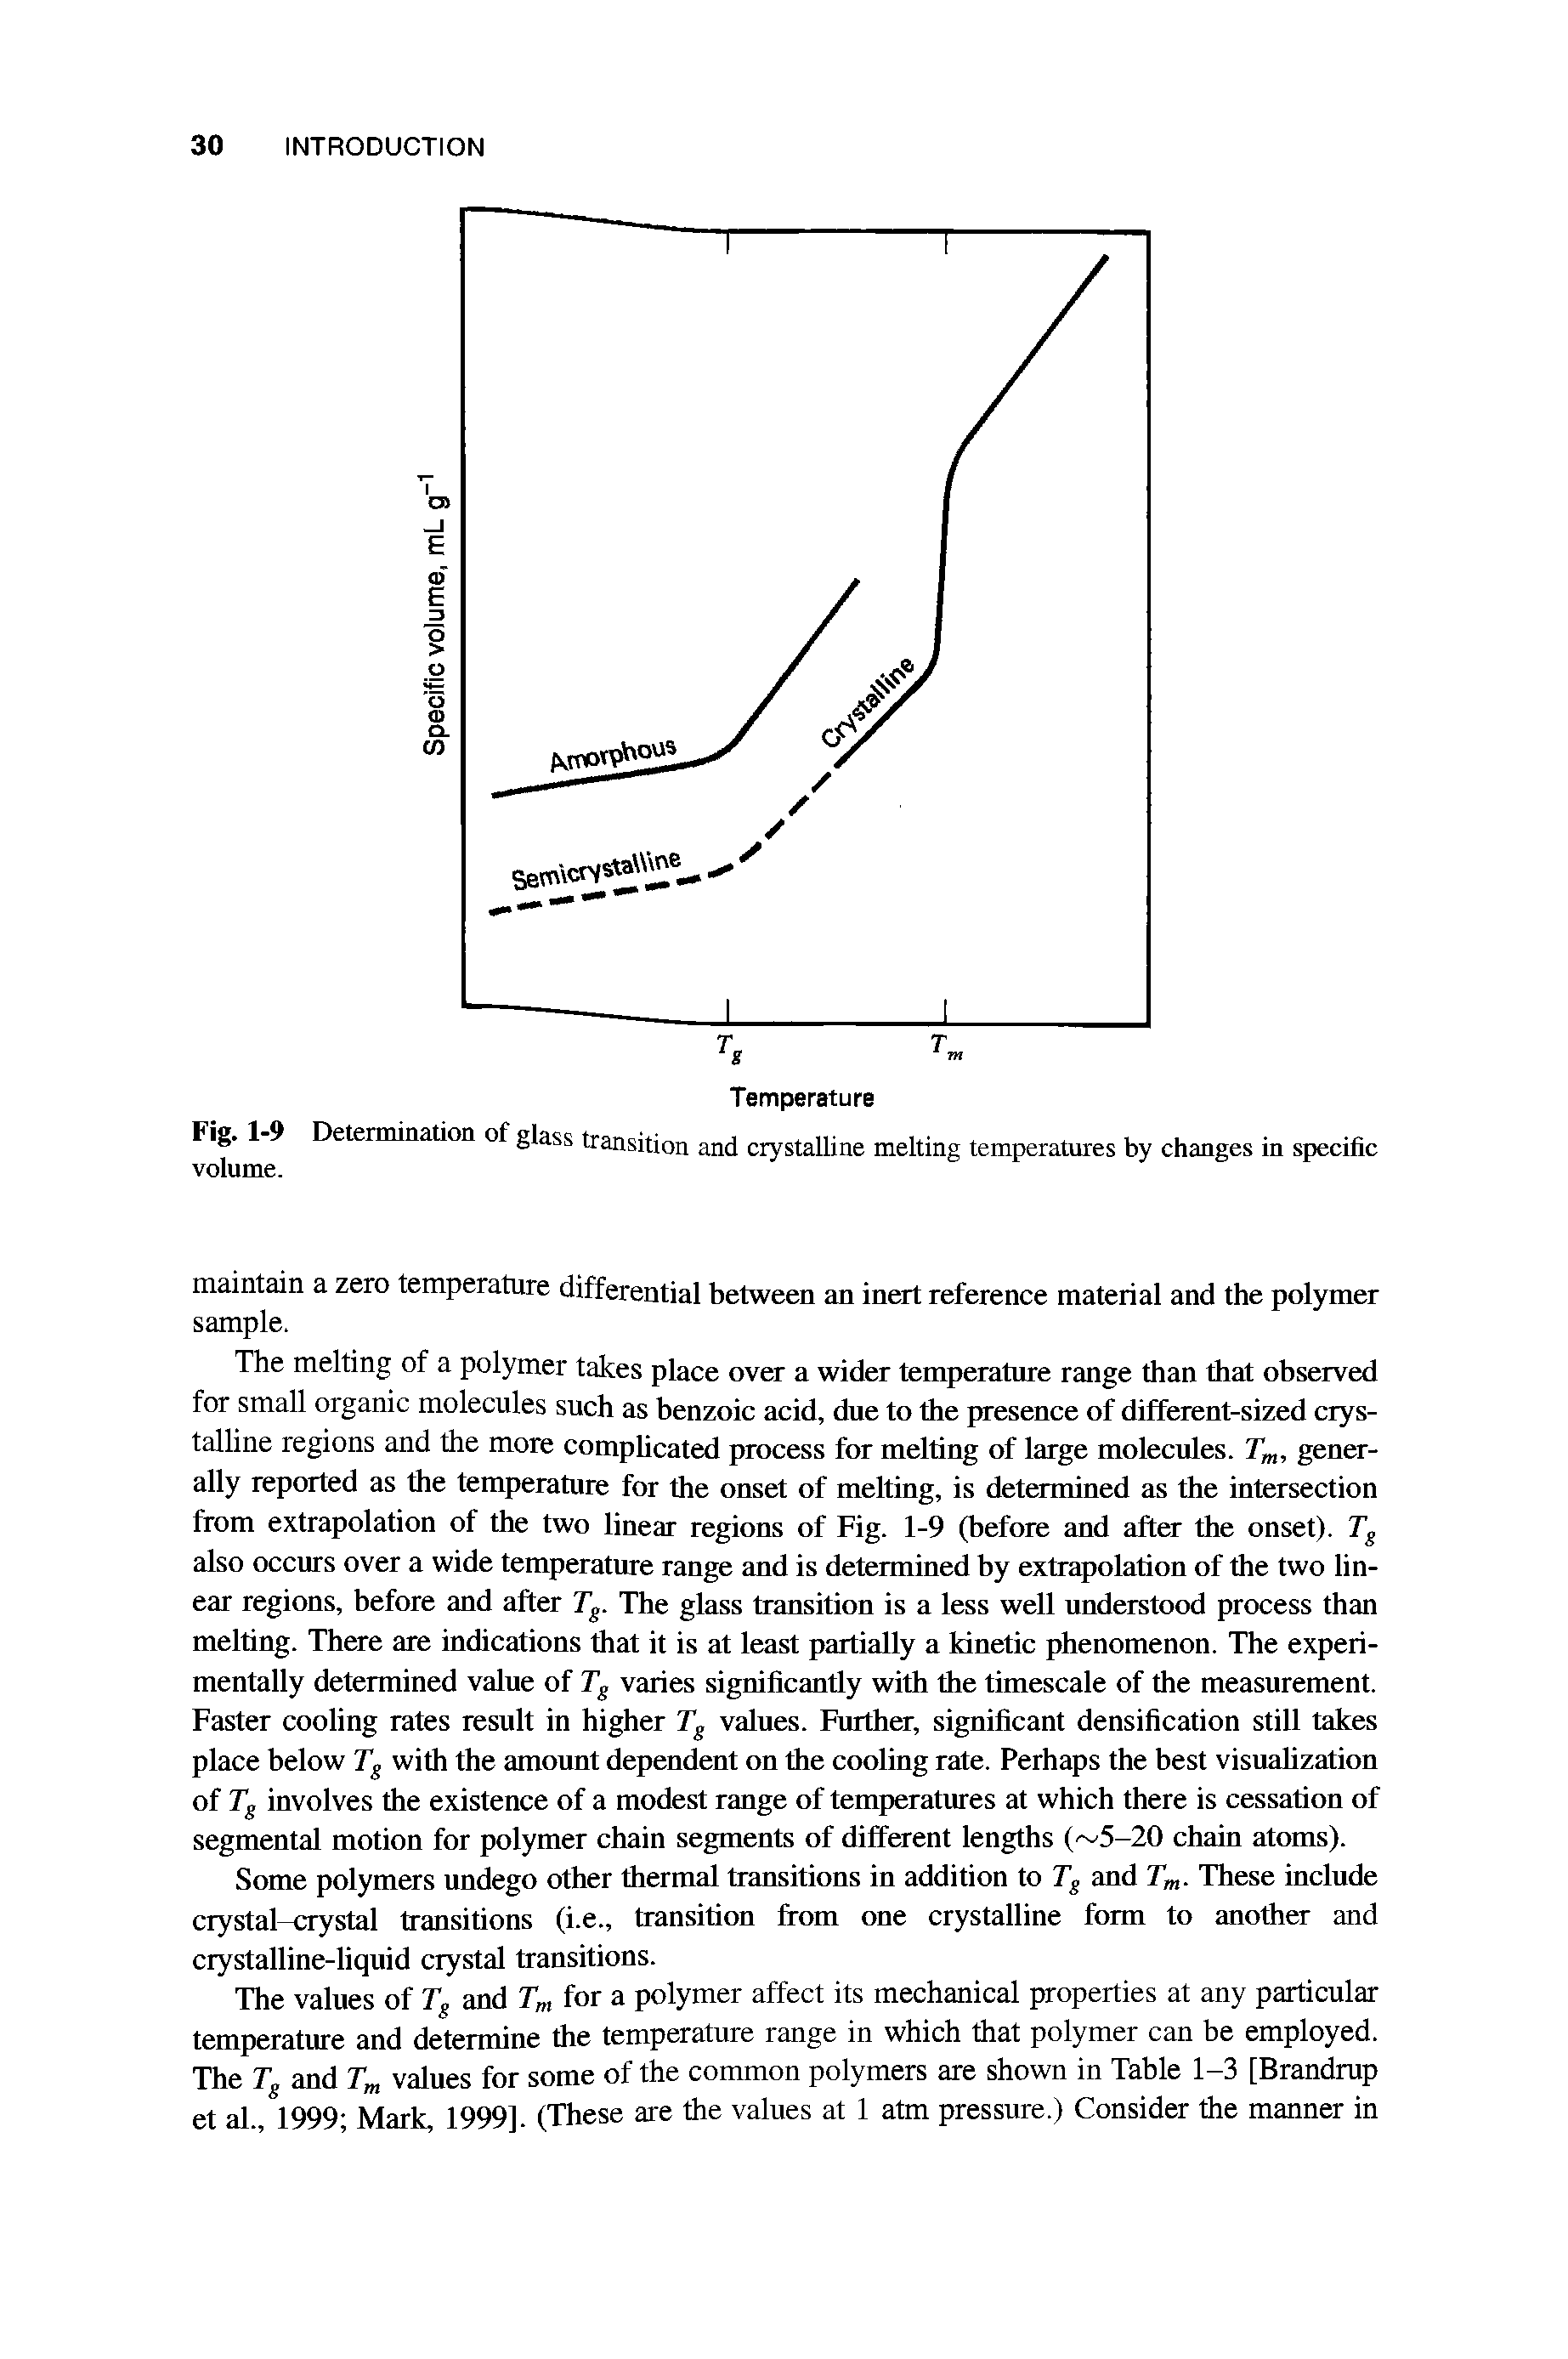 Fig. 1 9 Determination of glass transition and crystalline melting temperatures by changes in specific volume.